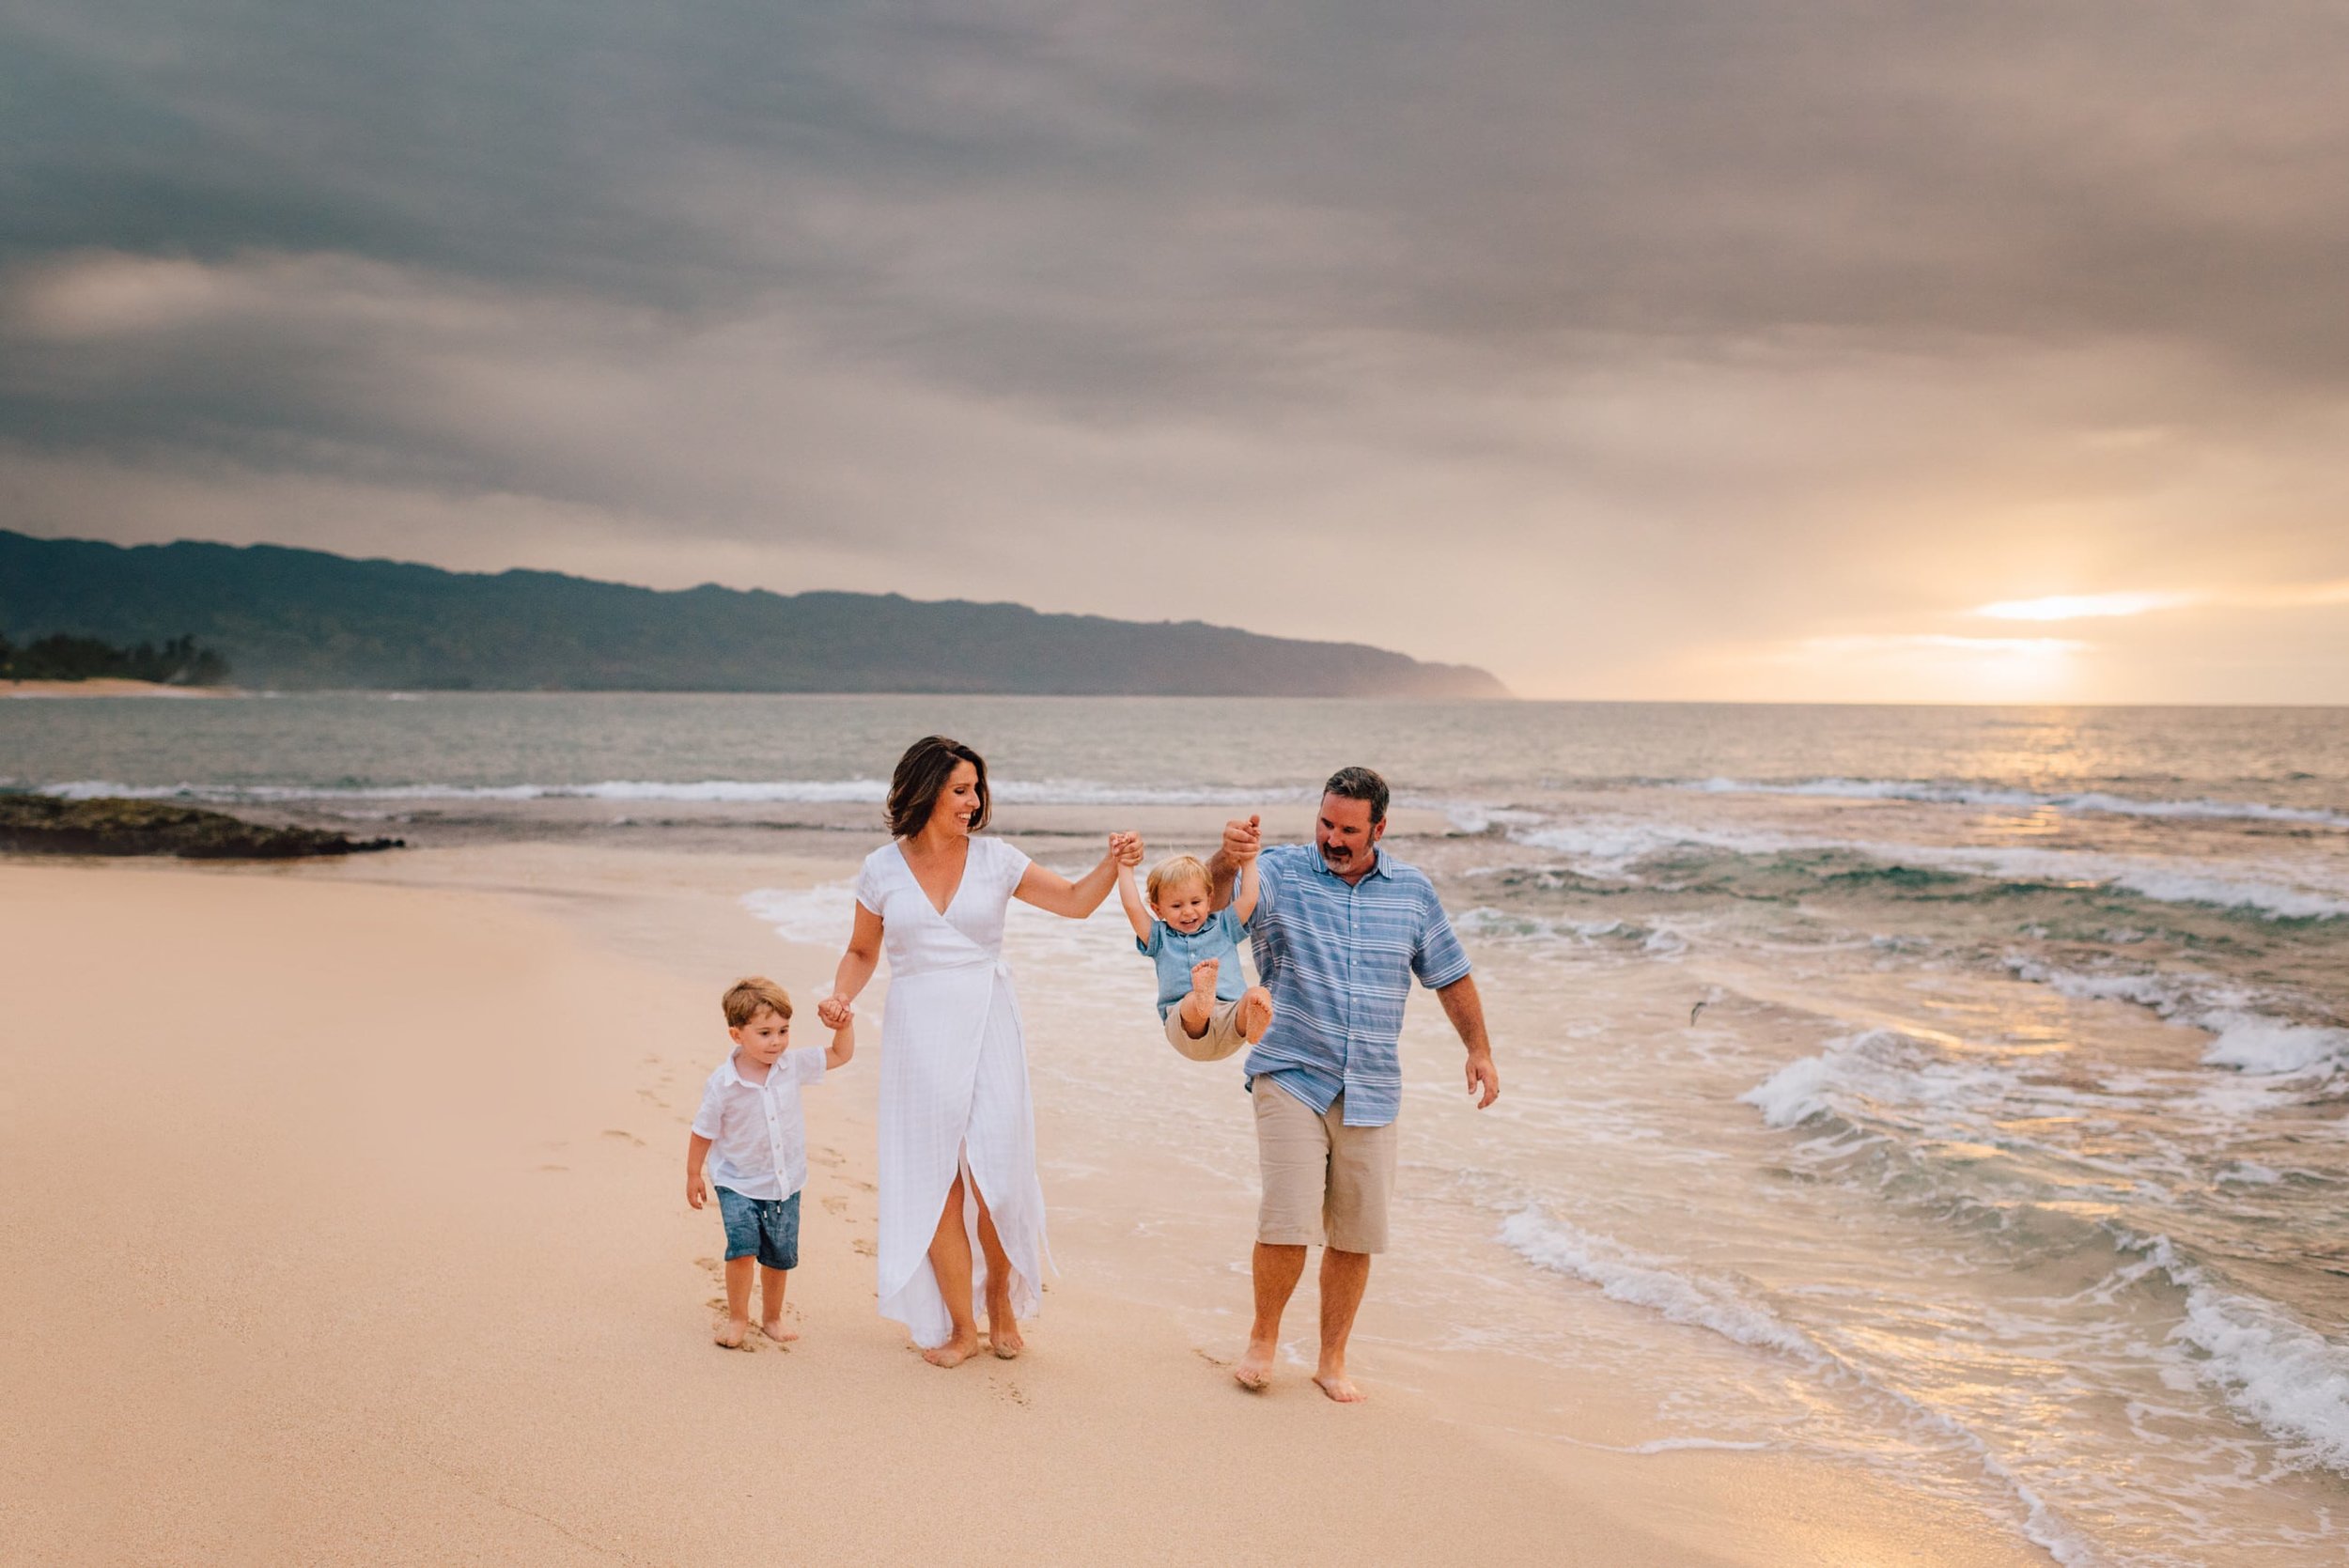 North Shore Oahu Family Photography Session